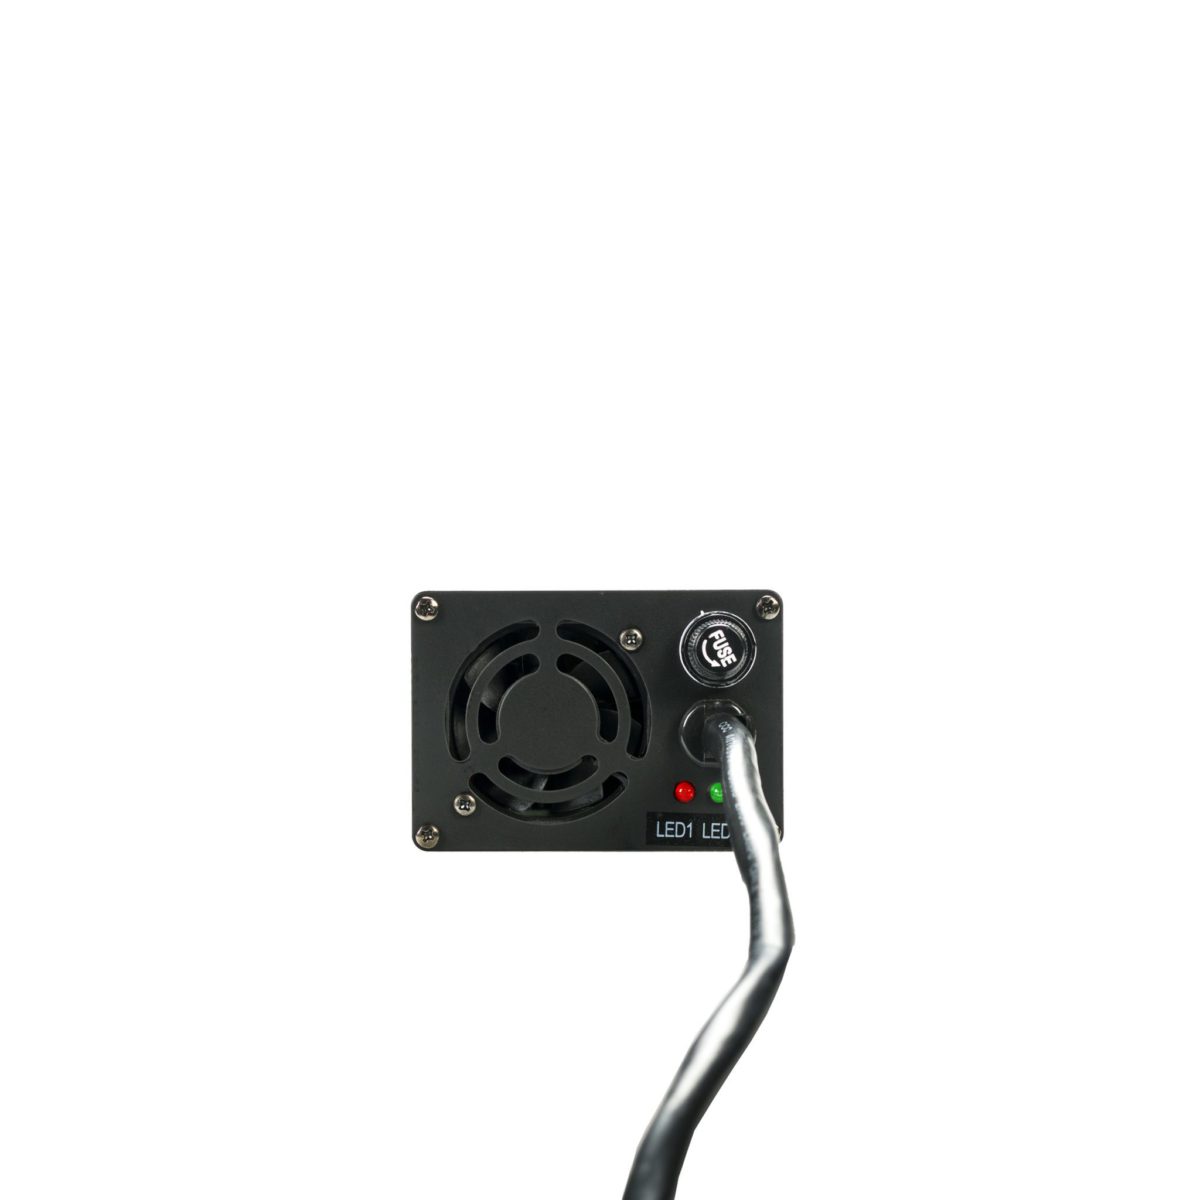 Rebelcell charger 14.6V20A LiFePO4 charger product image